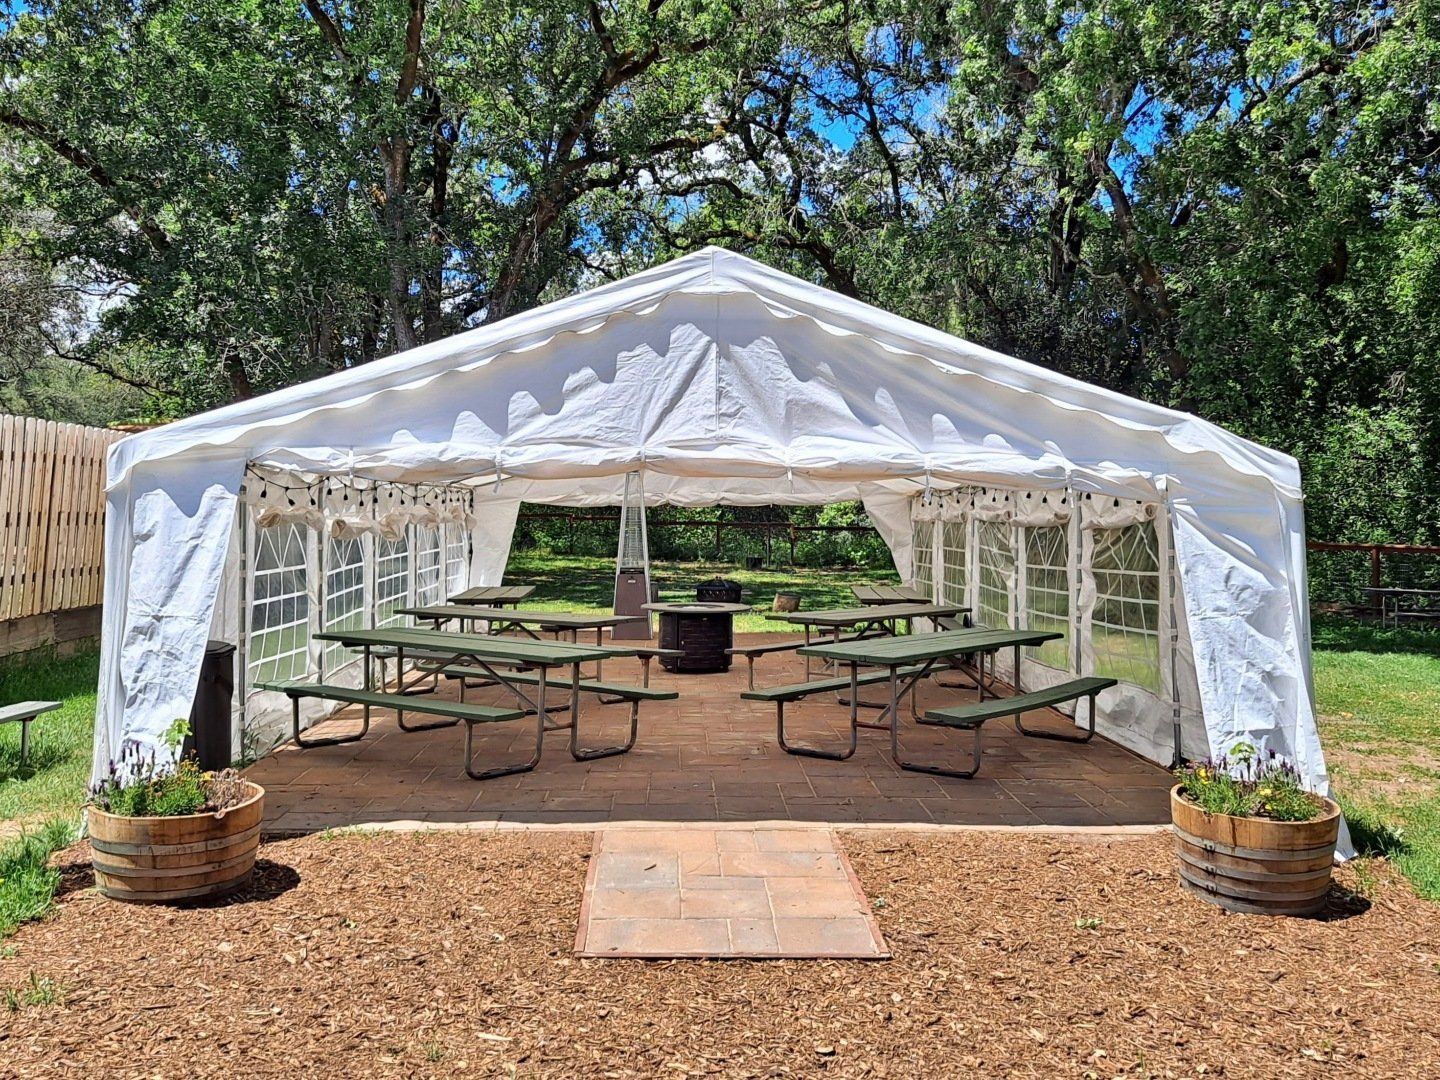 large canvas event tent on grass with large trees surrounding area